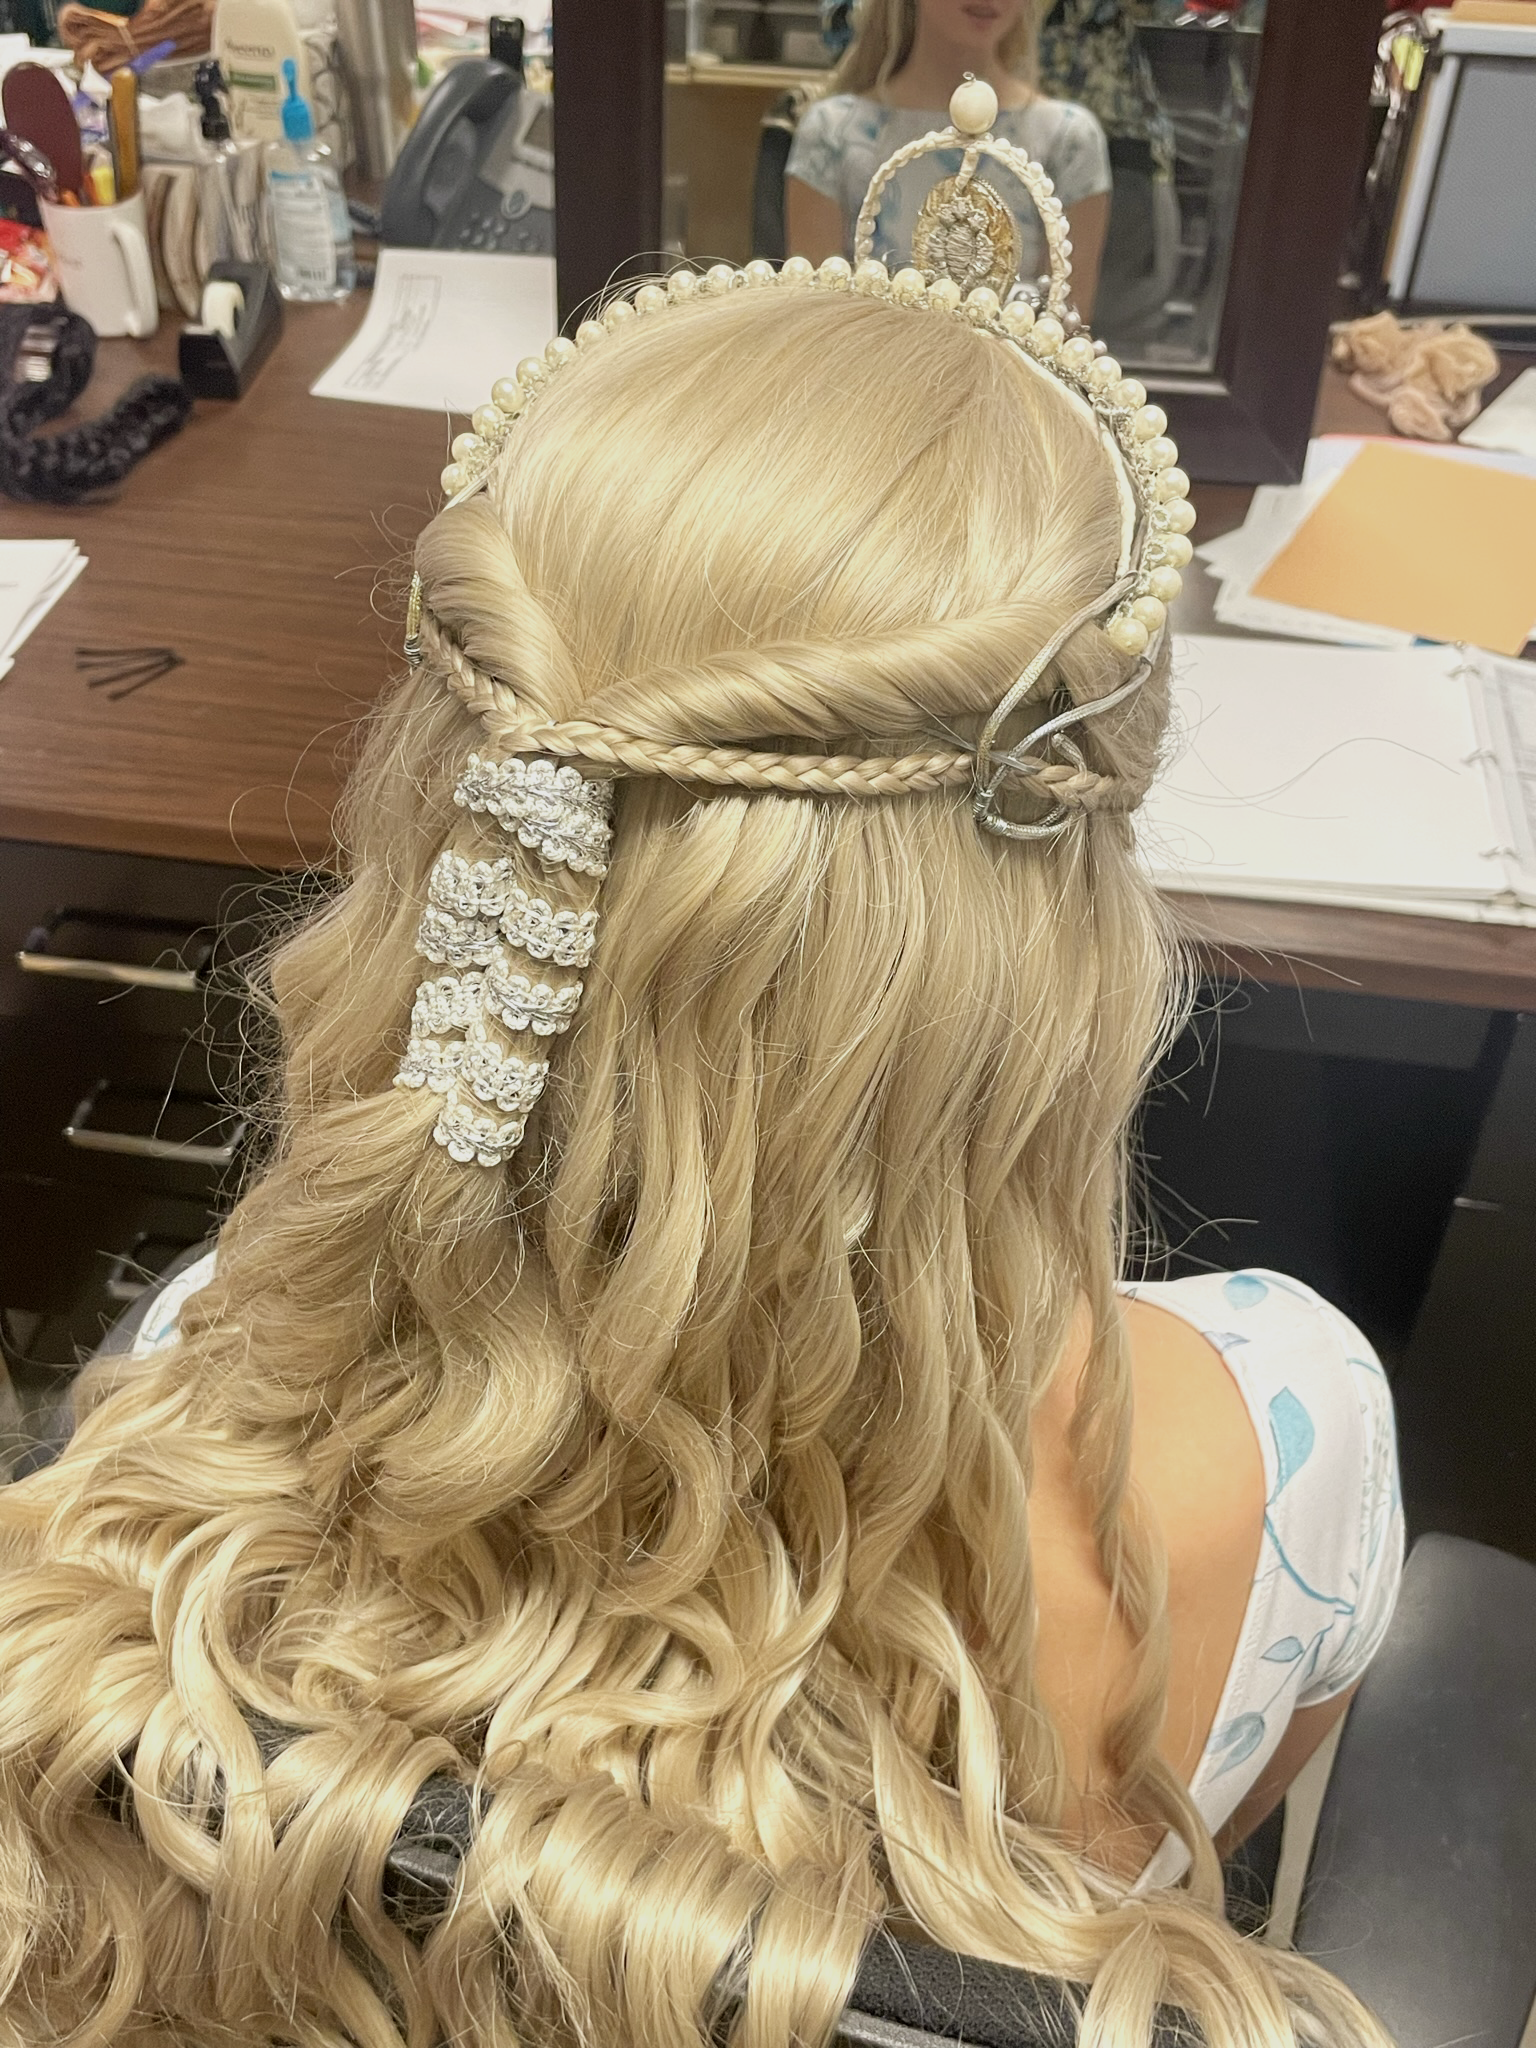 More Info for Looking Behind the Locks of the Brides’ Wigs